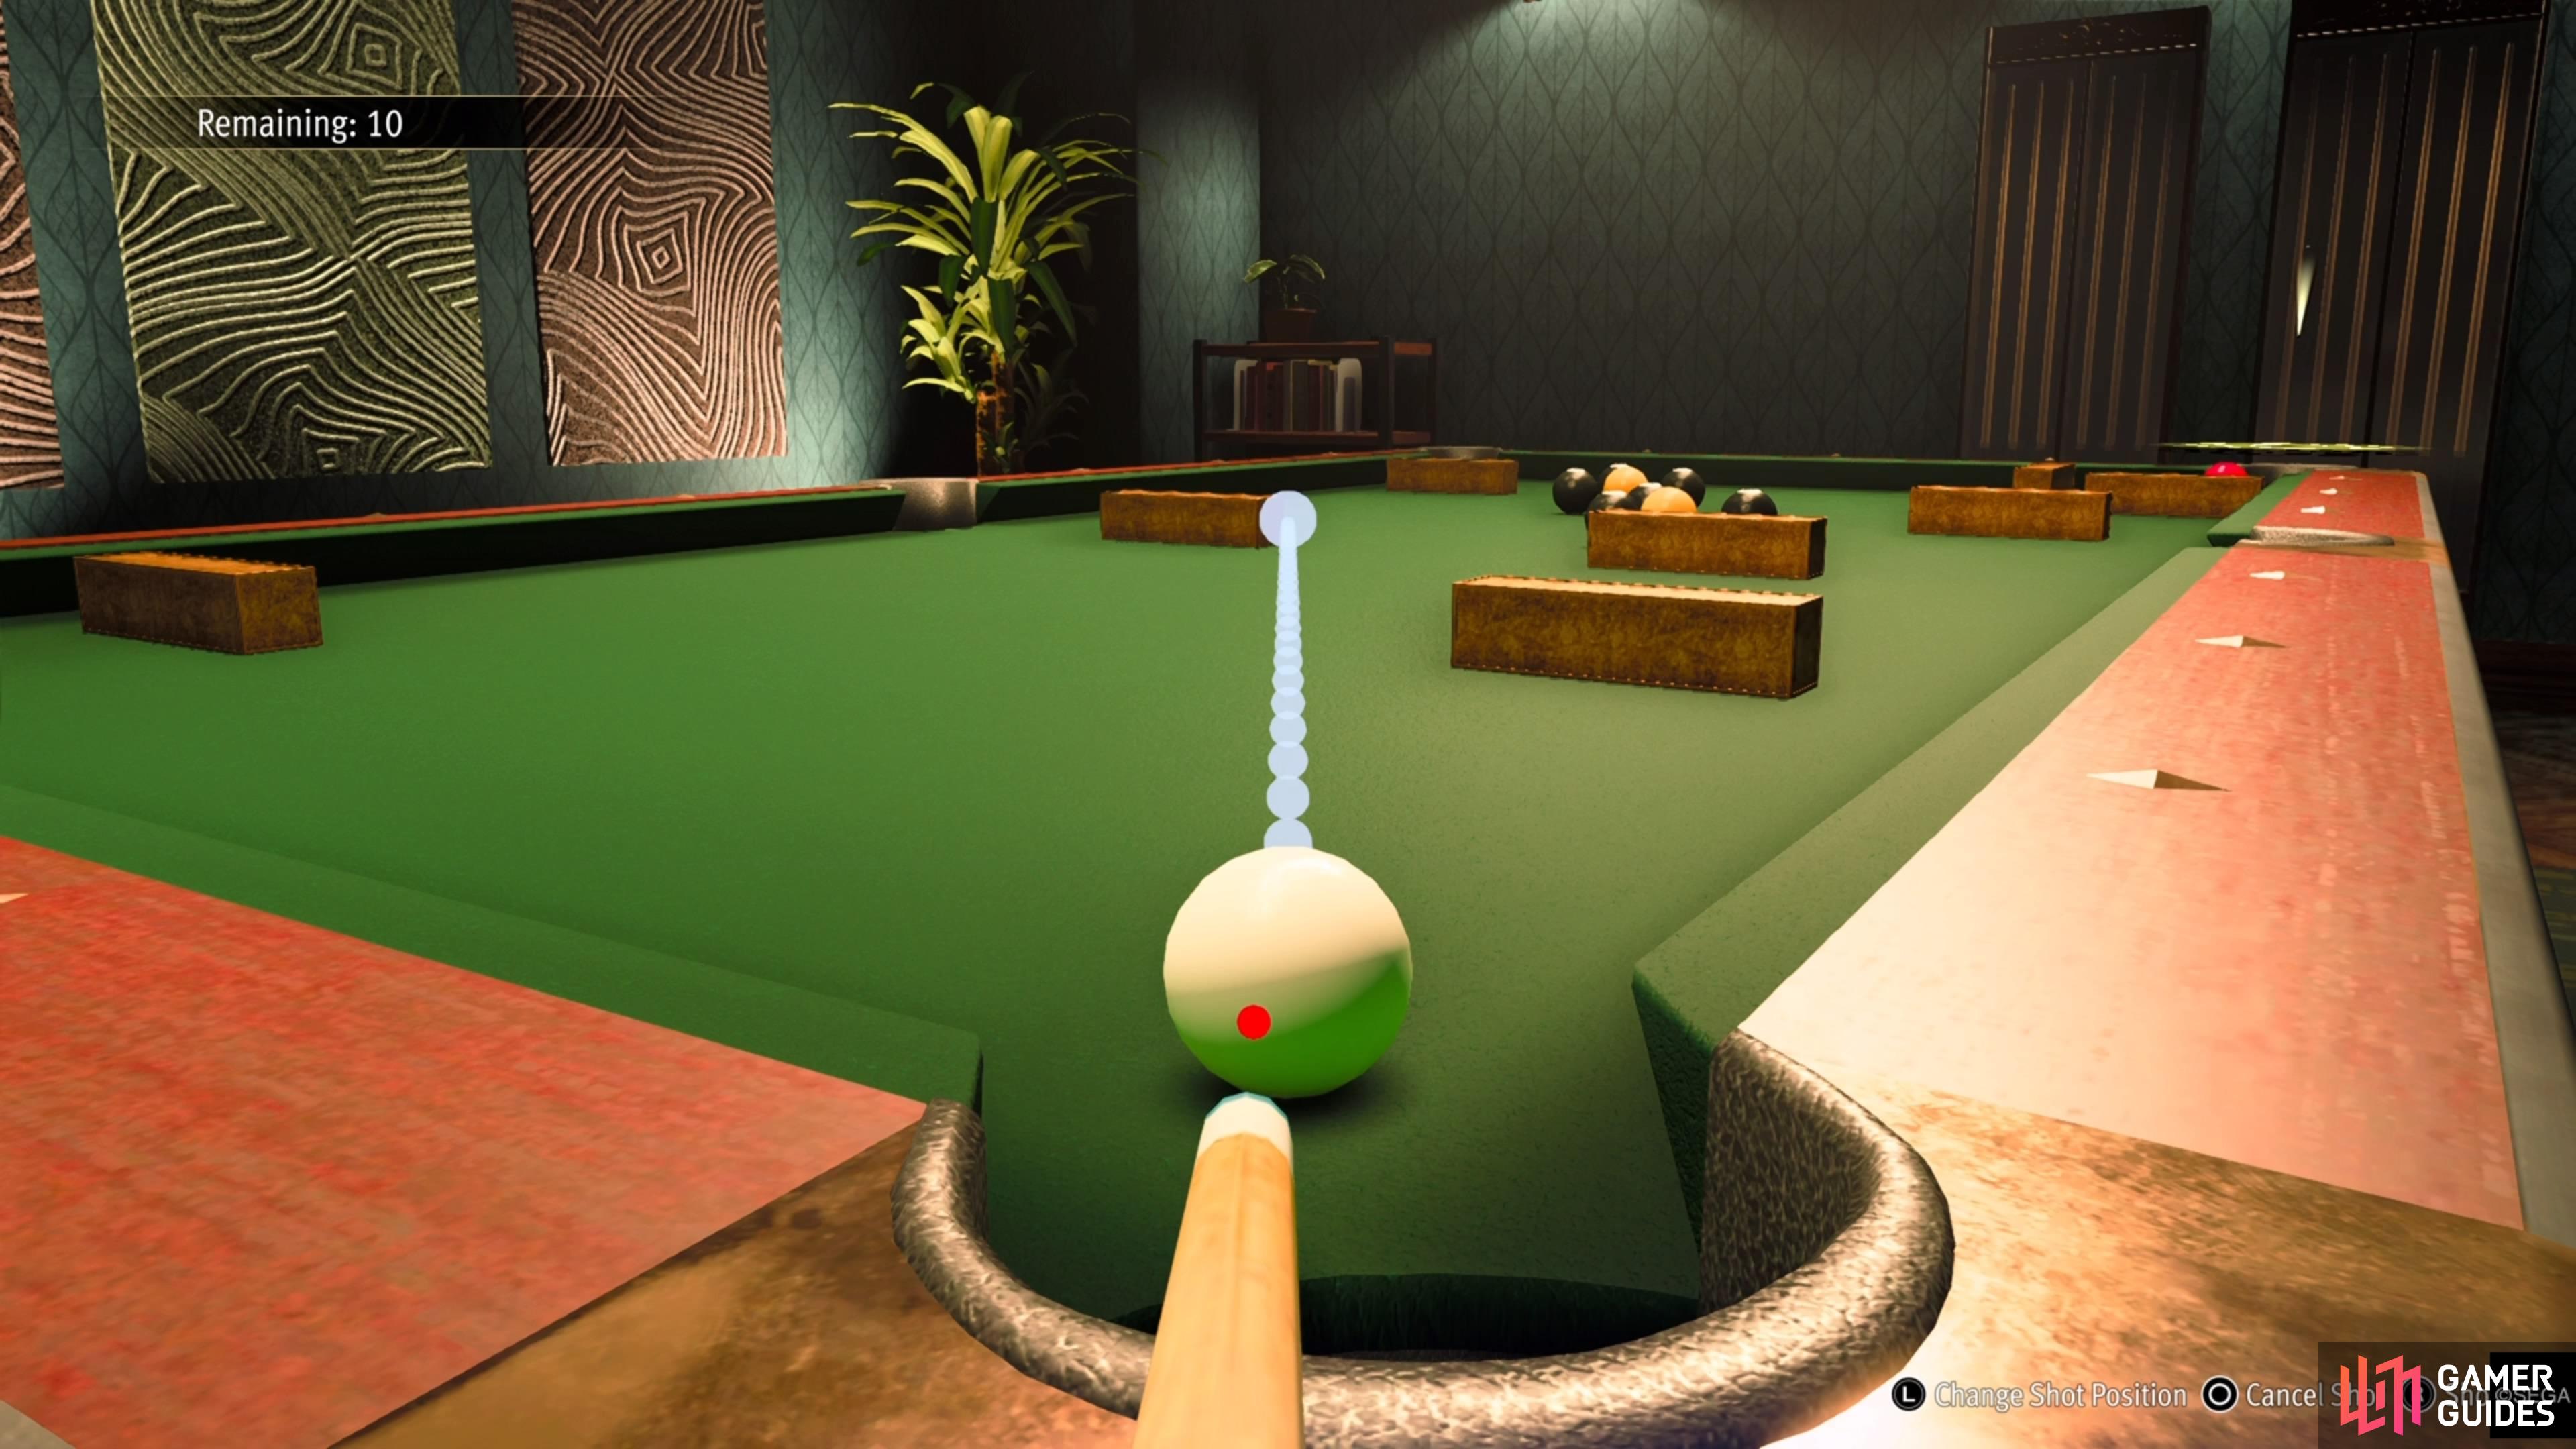 Use the left stick to move the red dot on the ball to about here for the shot.